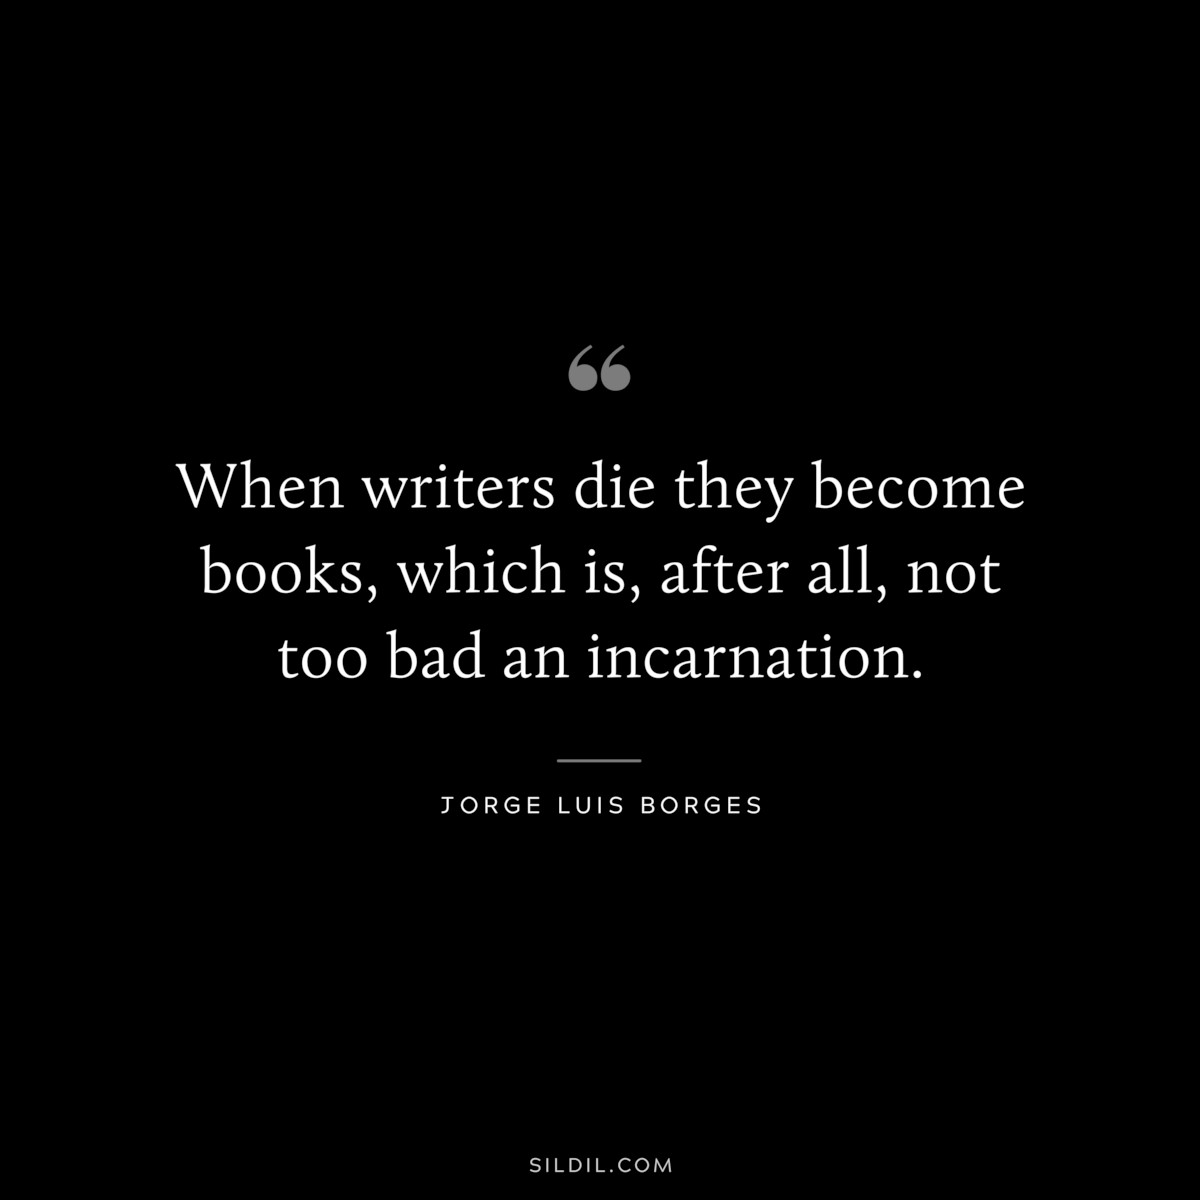 When writers die they become books, which is, after all, not too bad an incarnation. ― Jorge Luis Borges